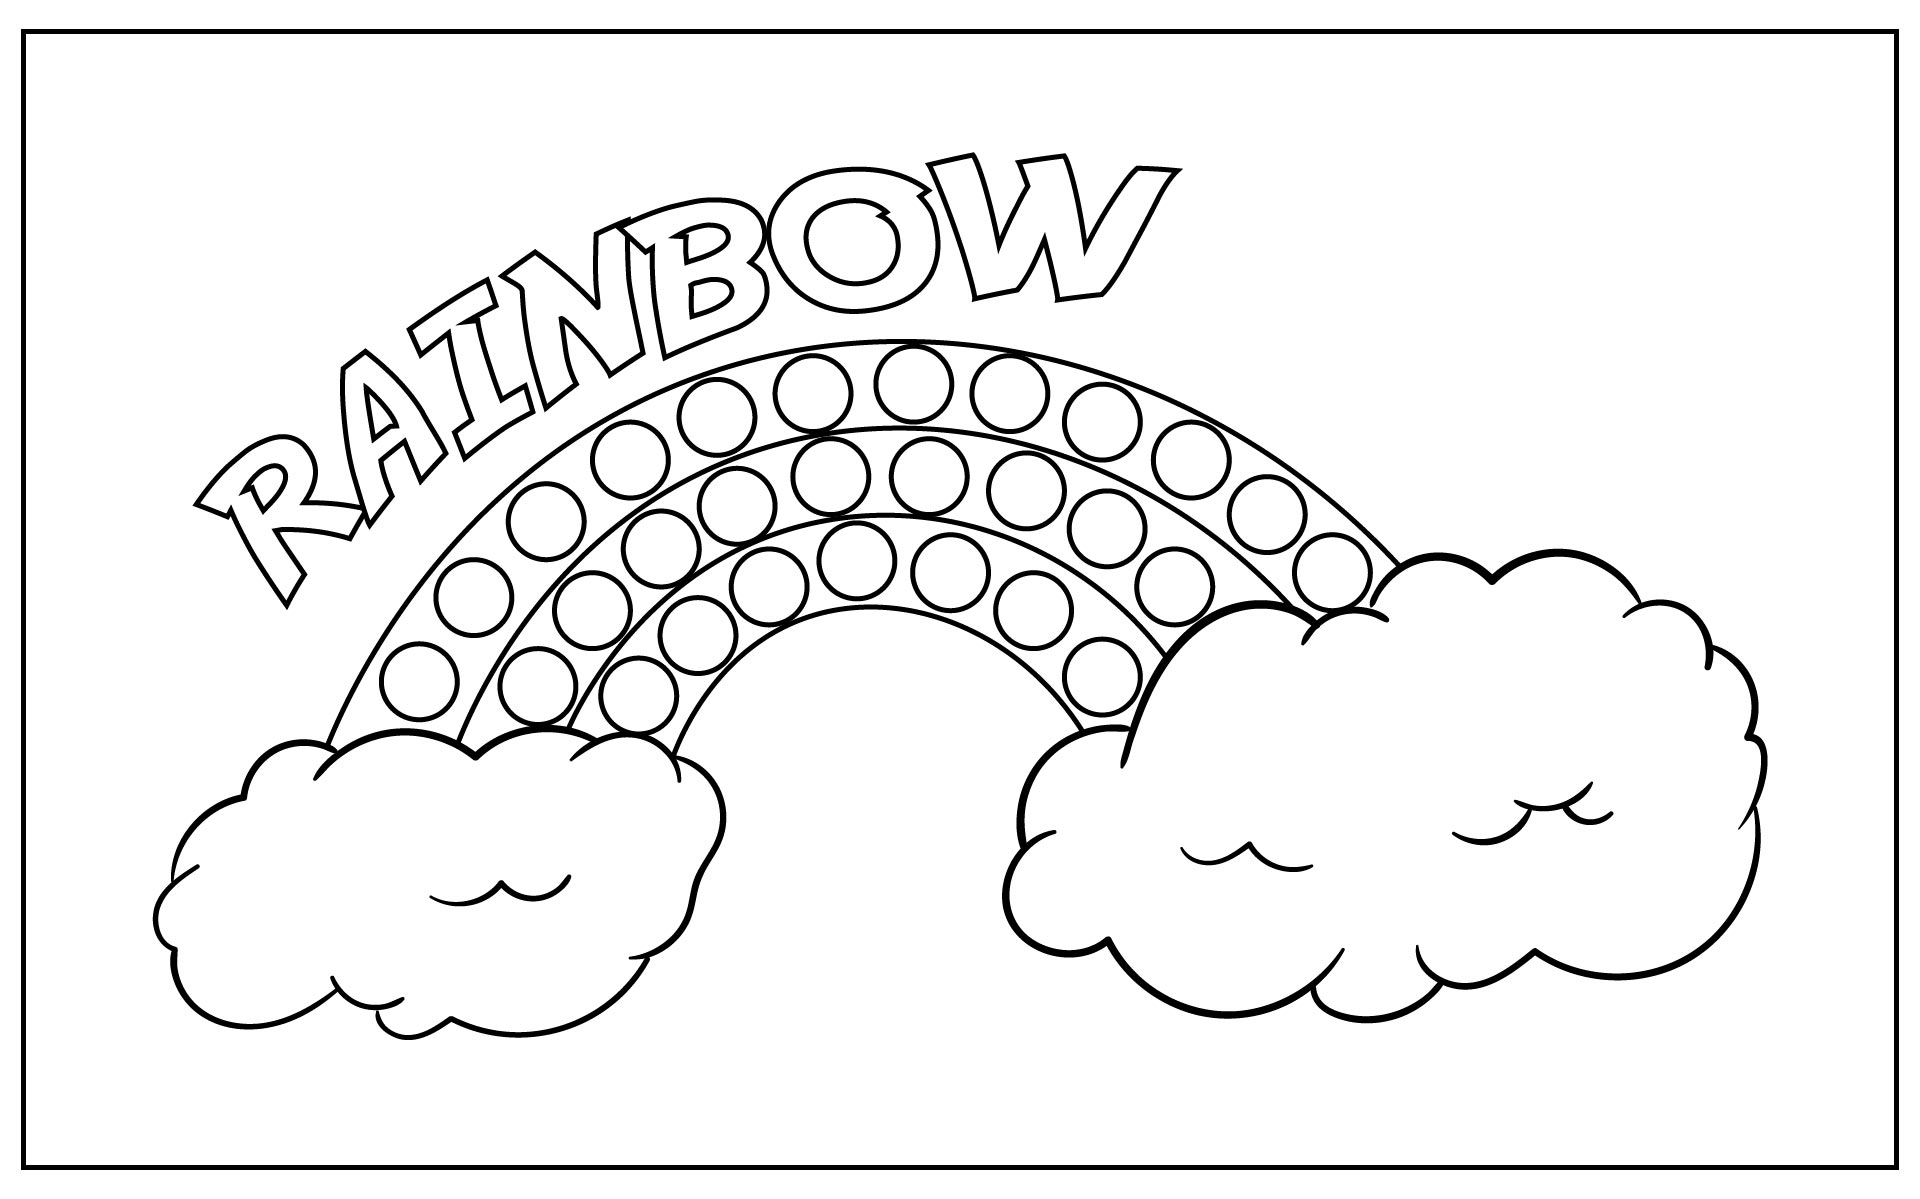 6 Best Images of Dot Rainbow Printable Coloring Pages - Rainbow Dot